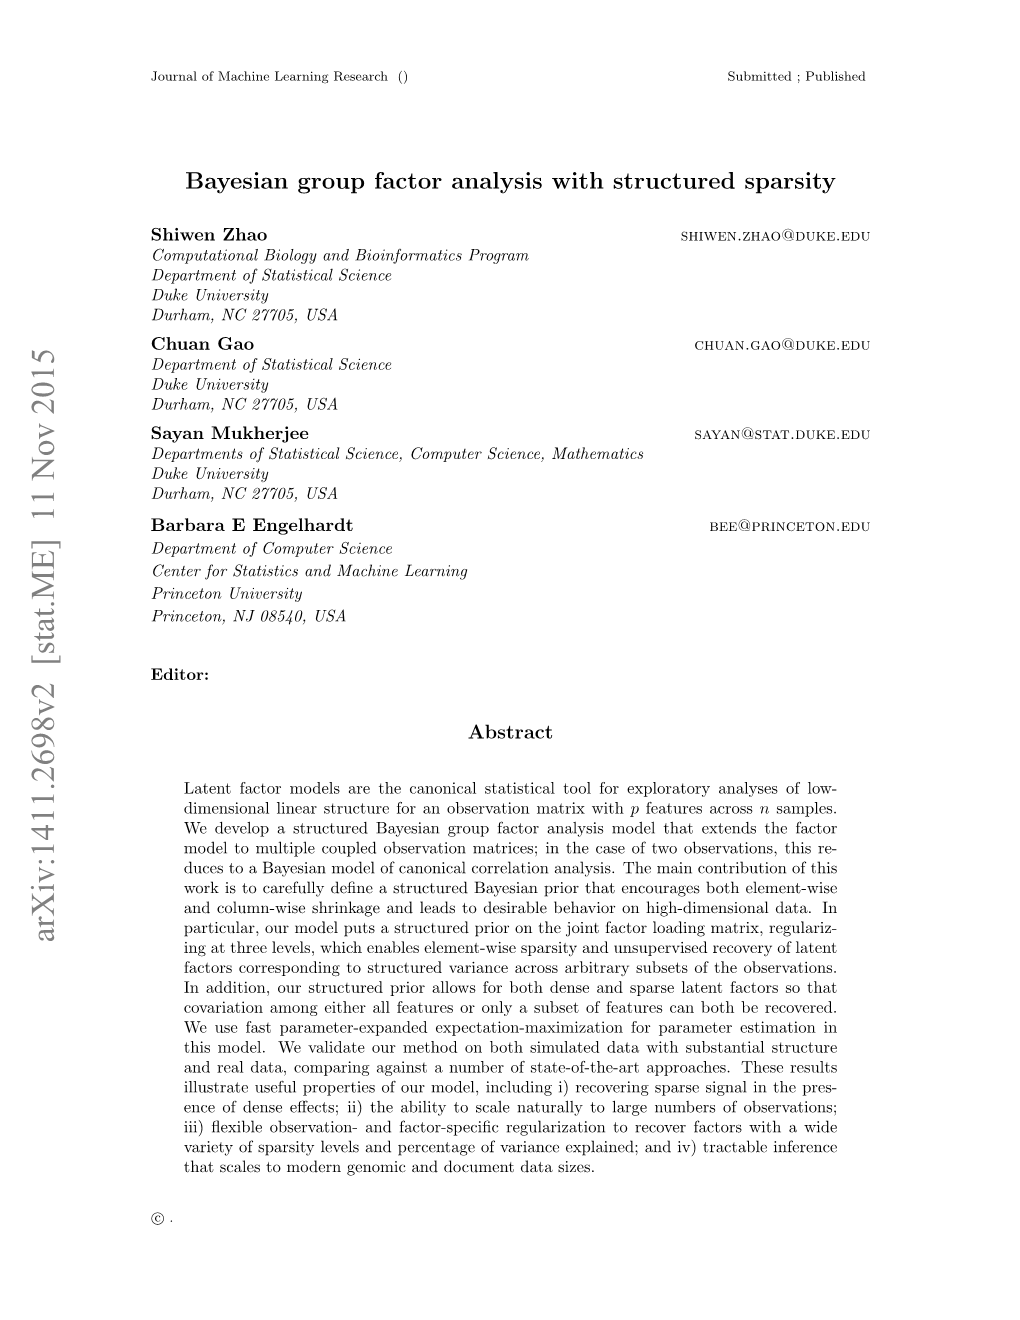 Bayesian Group Latent Factor Analysis with Structured Sparsity